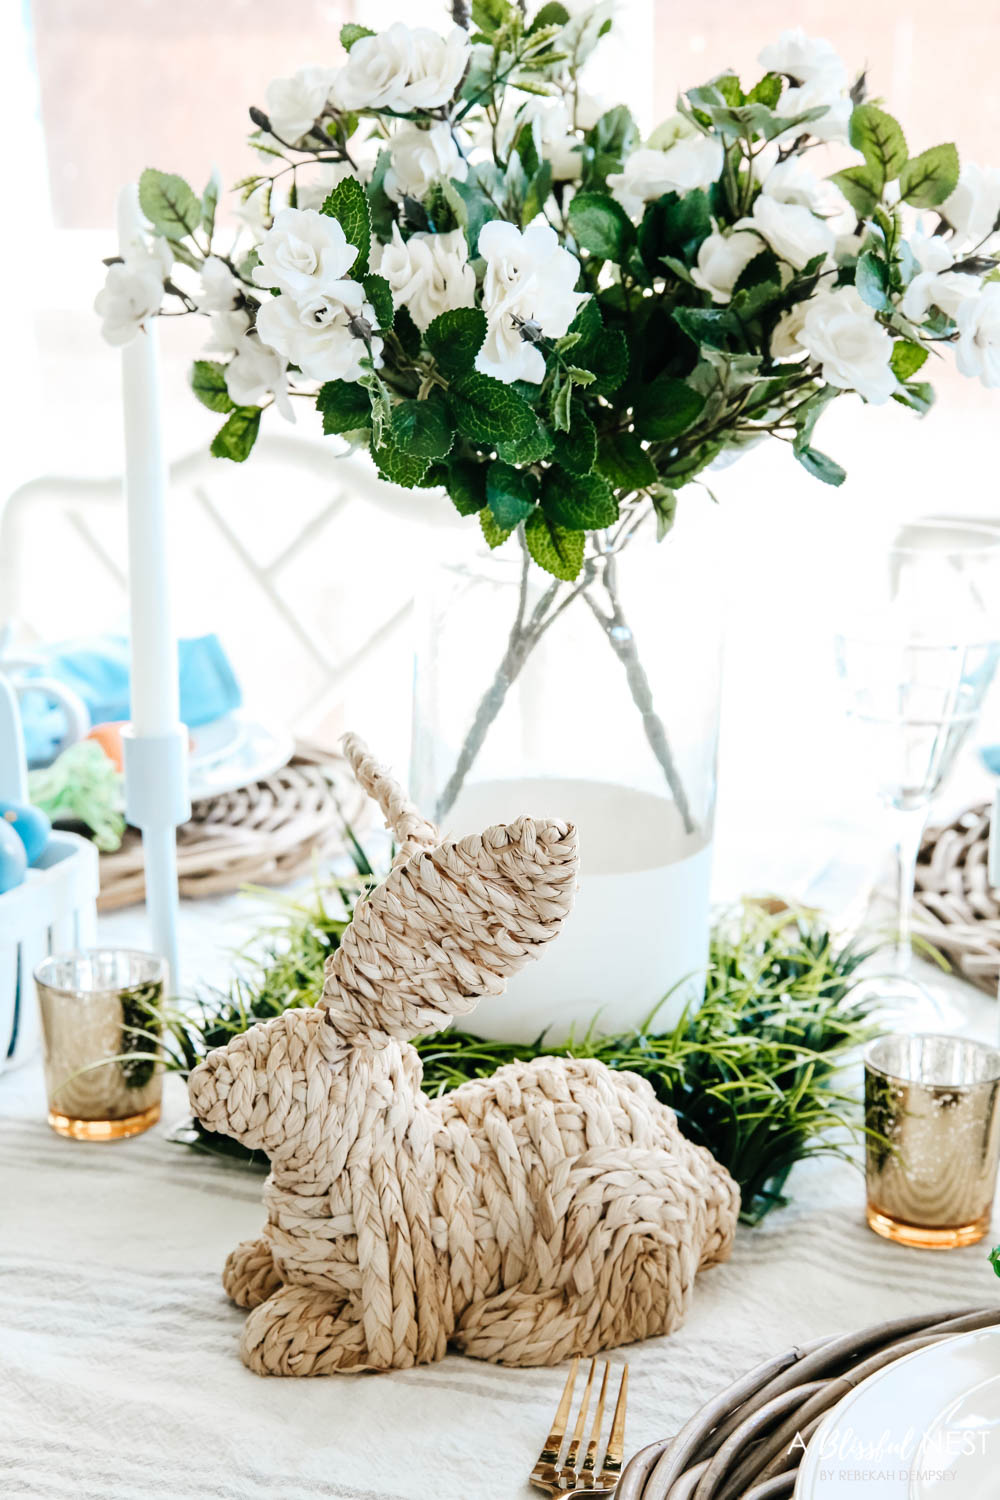 Close up of basket weave bunny used in the center of the Easter table with white flowers in a vase